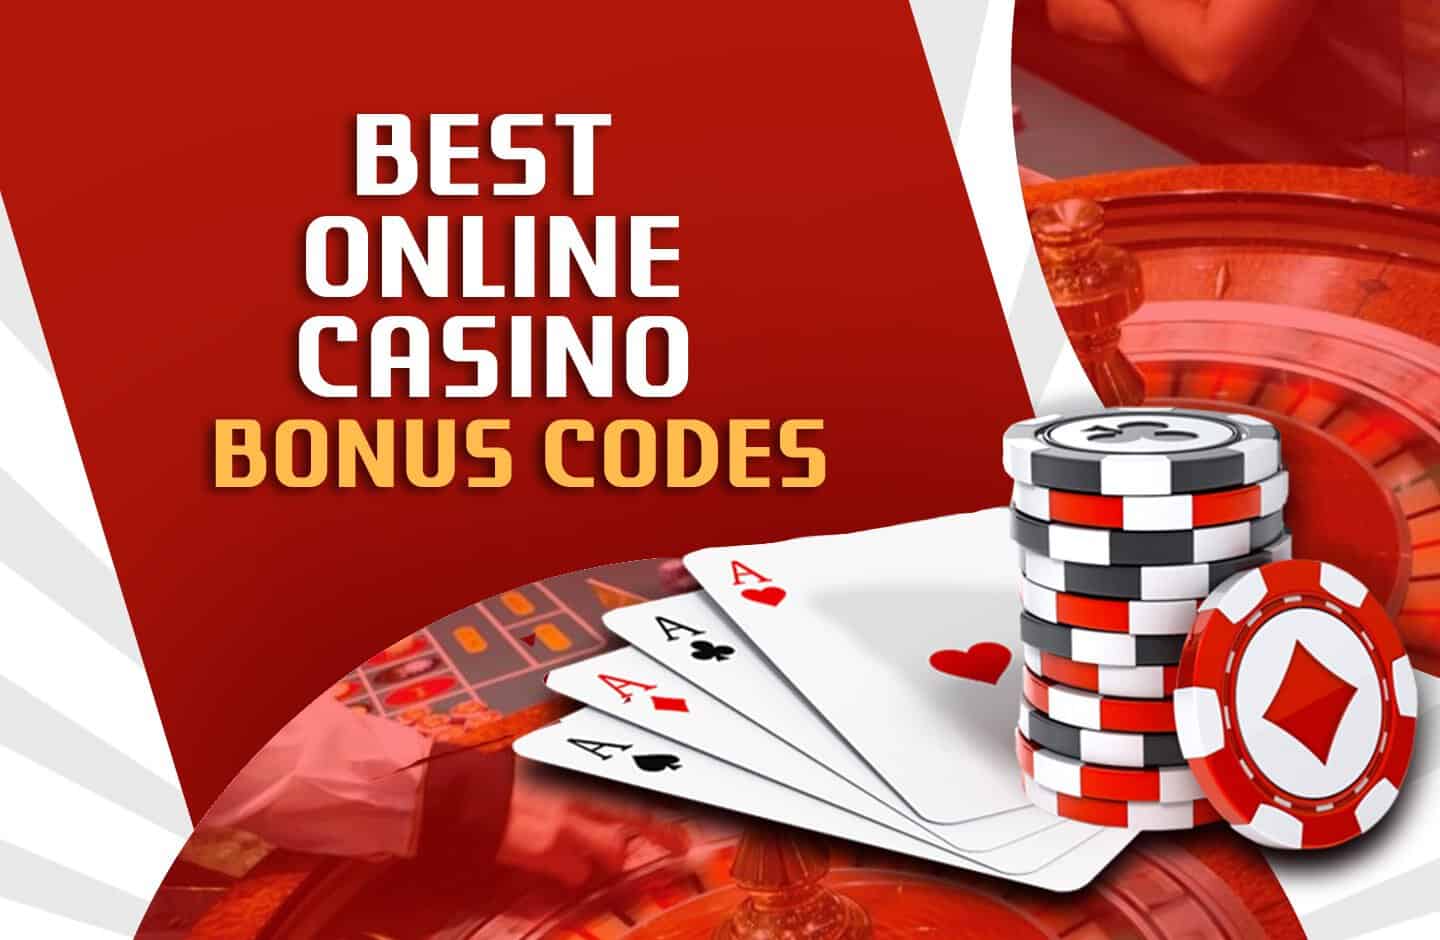 Best Casino Bonuses: Get up to $12k + Exclusive Promotions